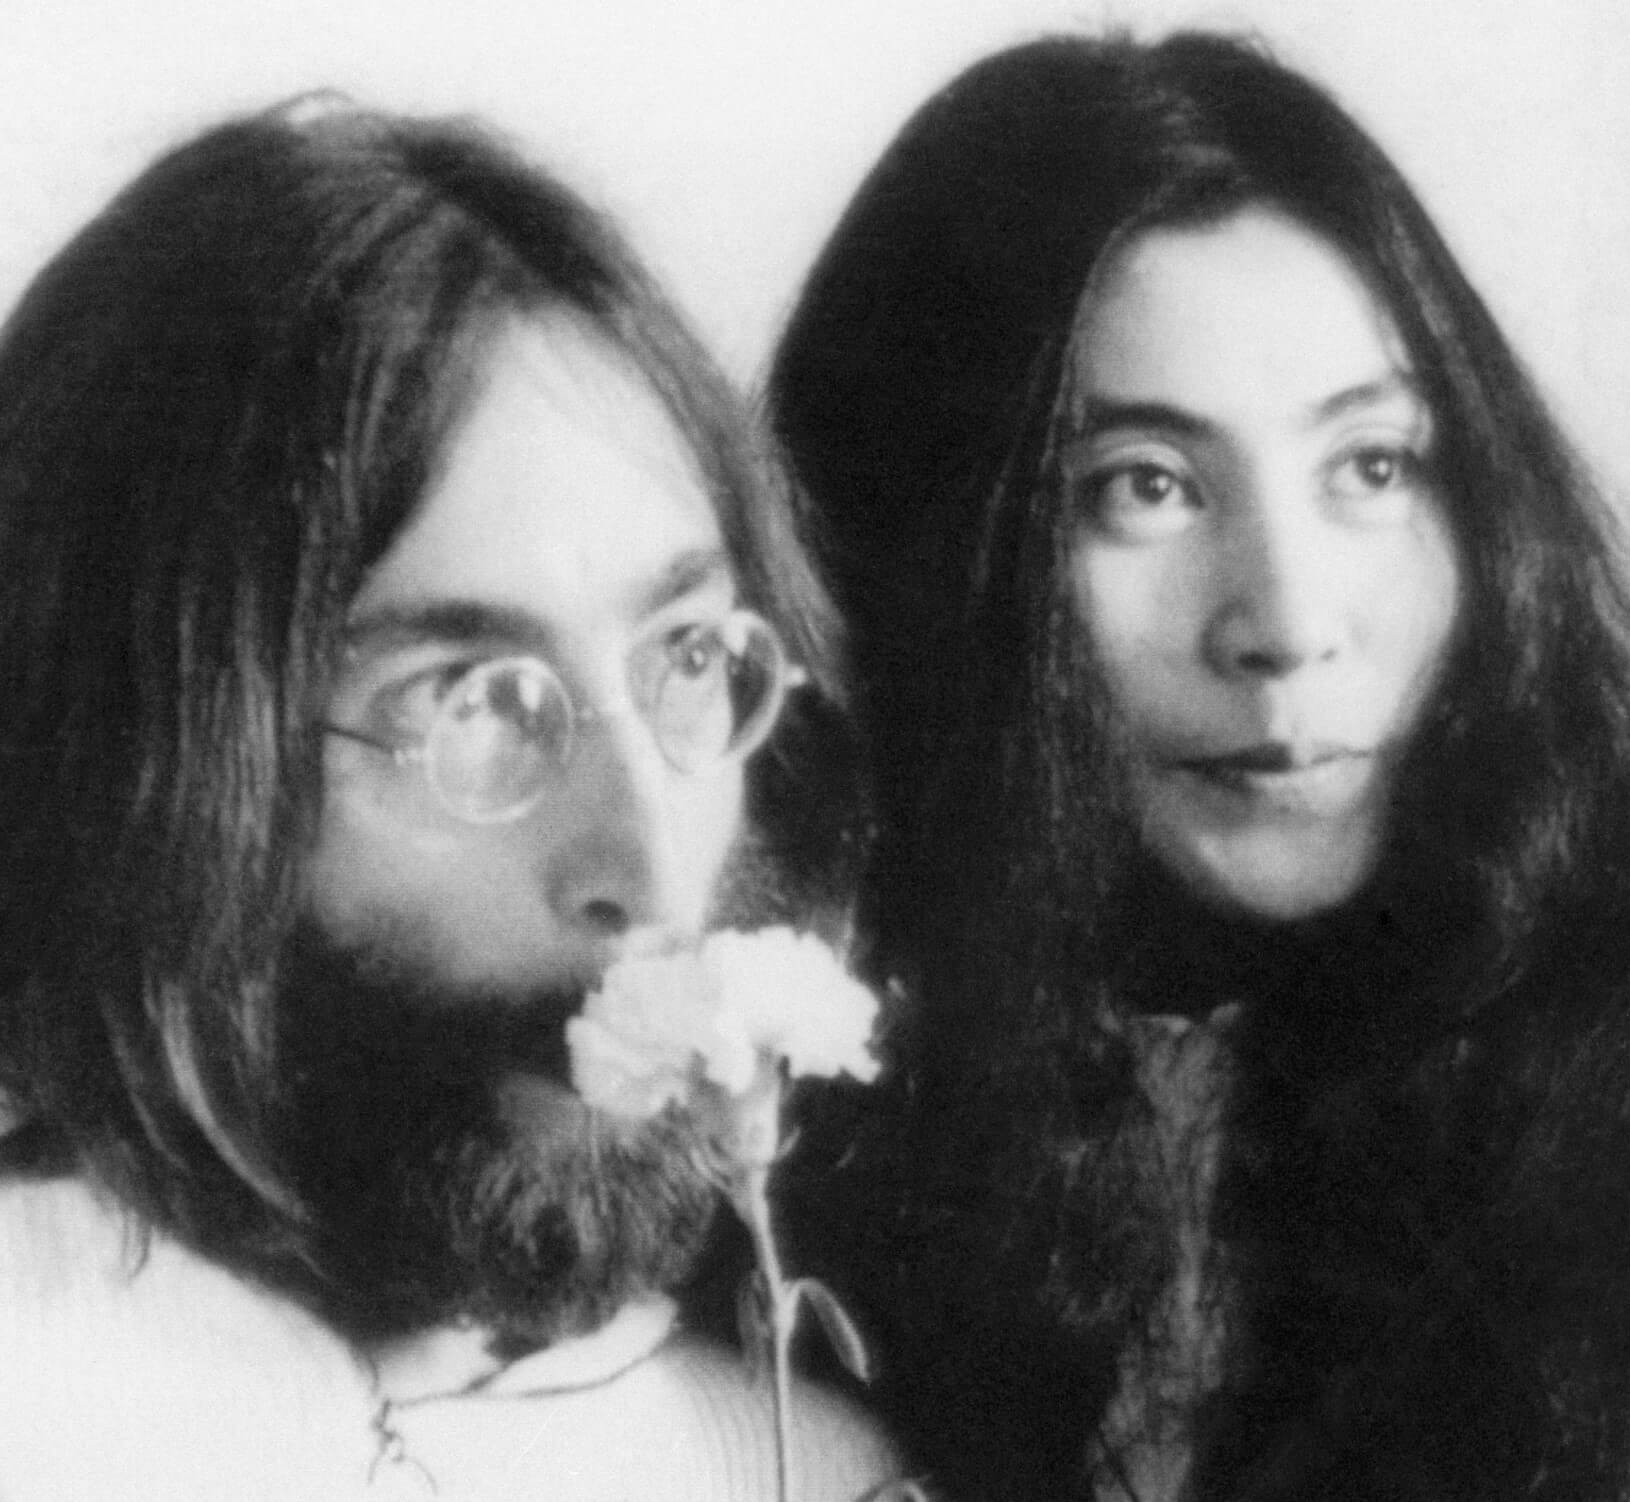 John Lennon and Yoko Ono in black-and-white during the "Give Peace a Chance" era